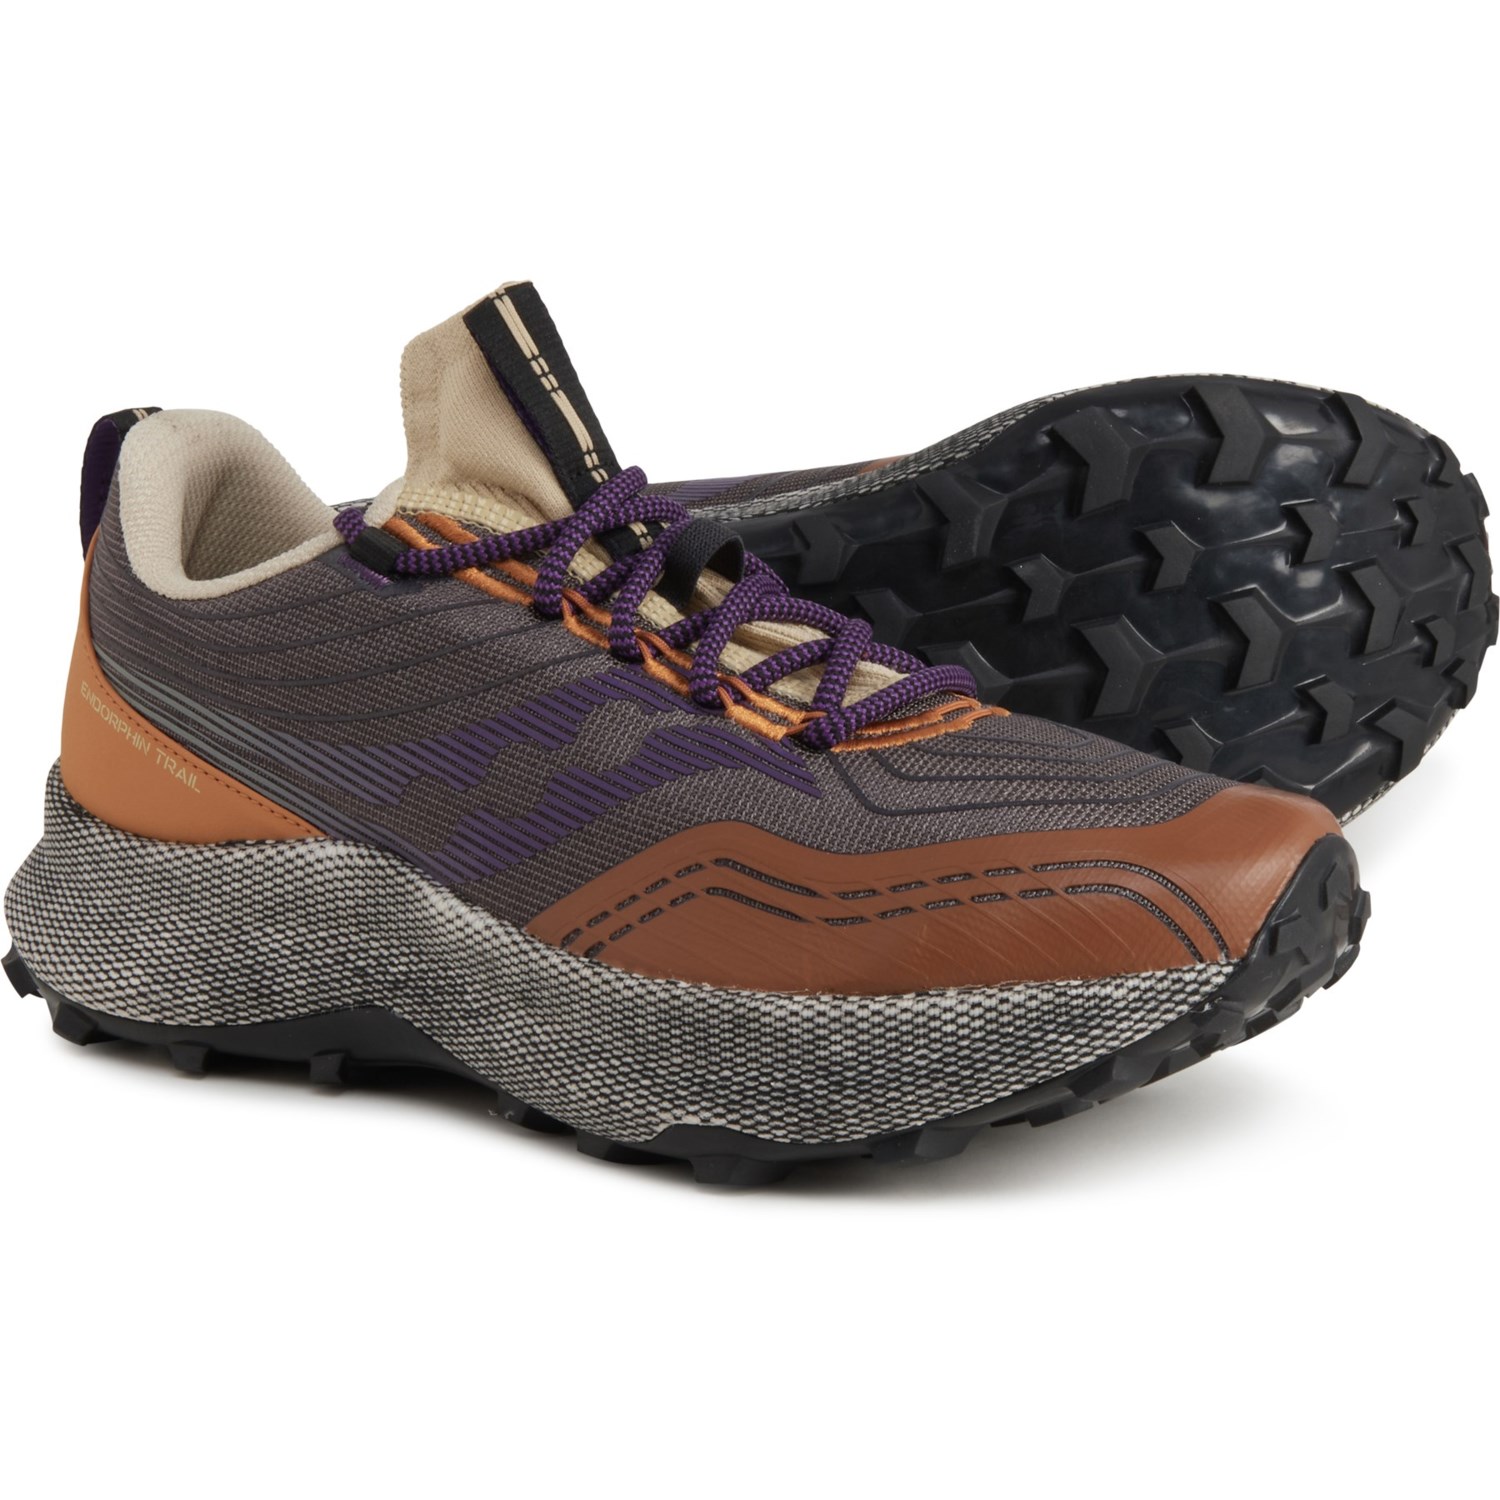 Saucony Endorphin Trail Peak Running Shoes (For Men) - Save 74%